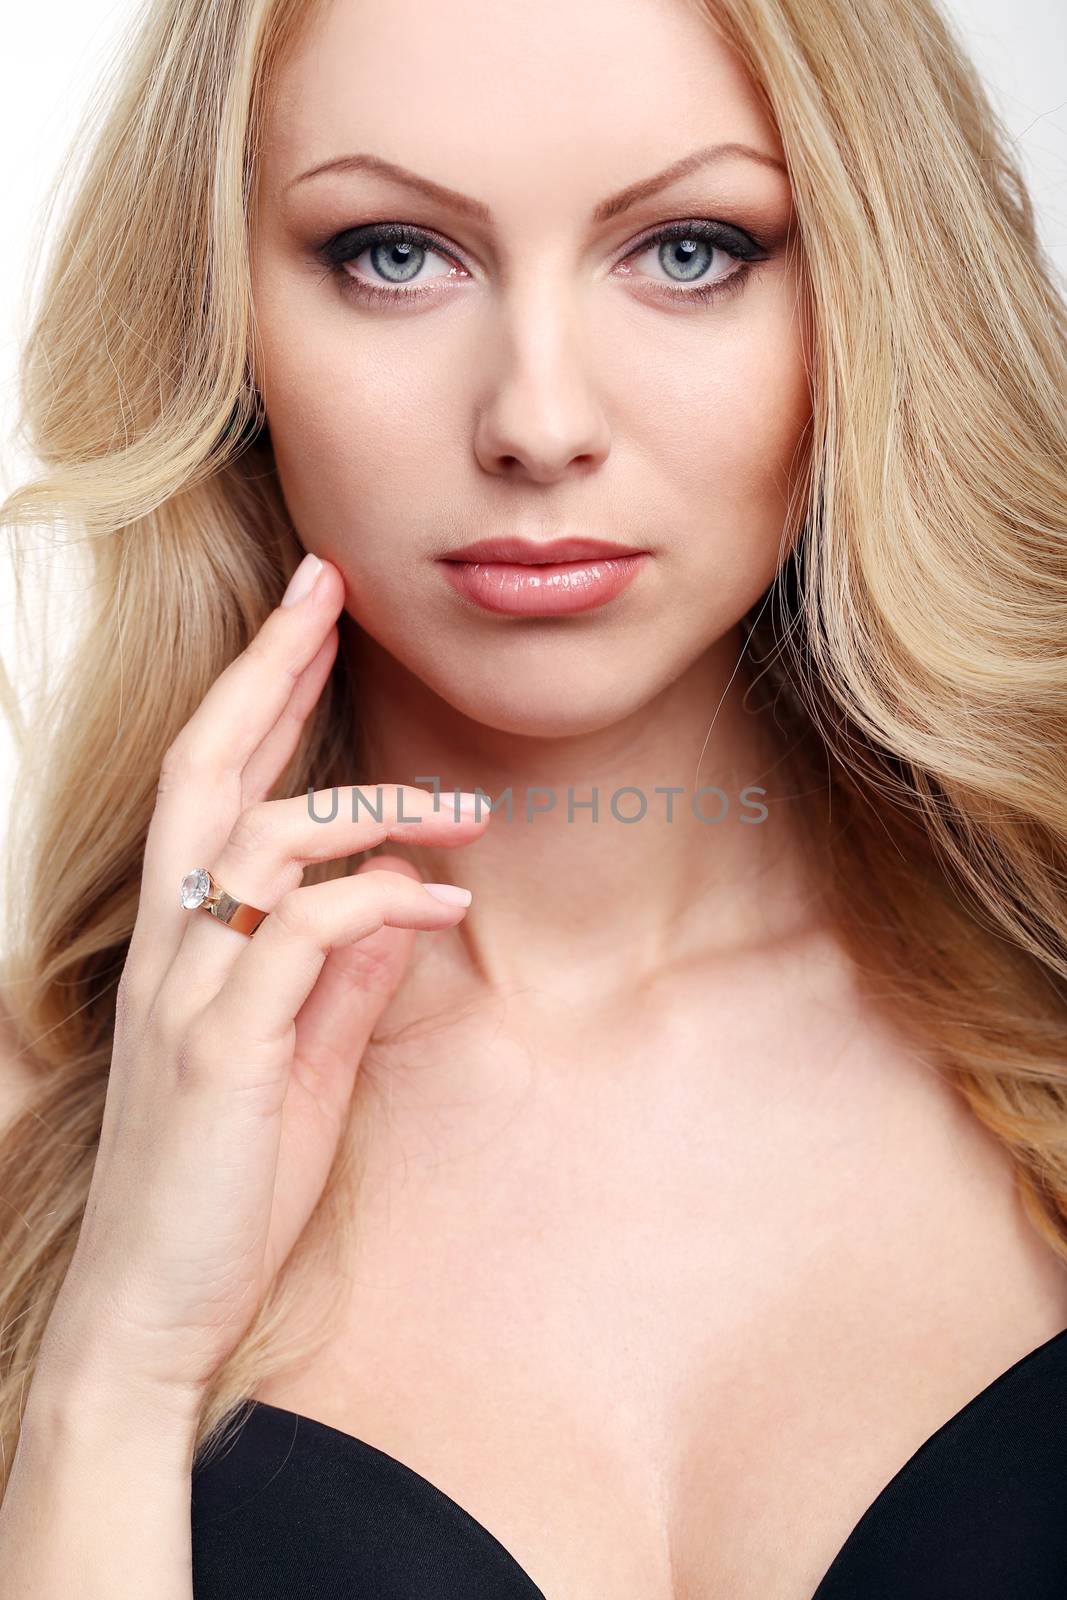 Portrait of a beautiful girl with blonde and curly hair who is posing over a white background